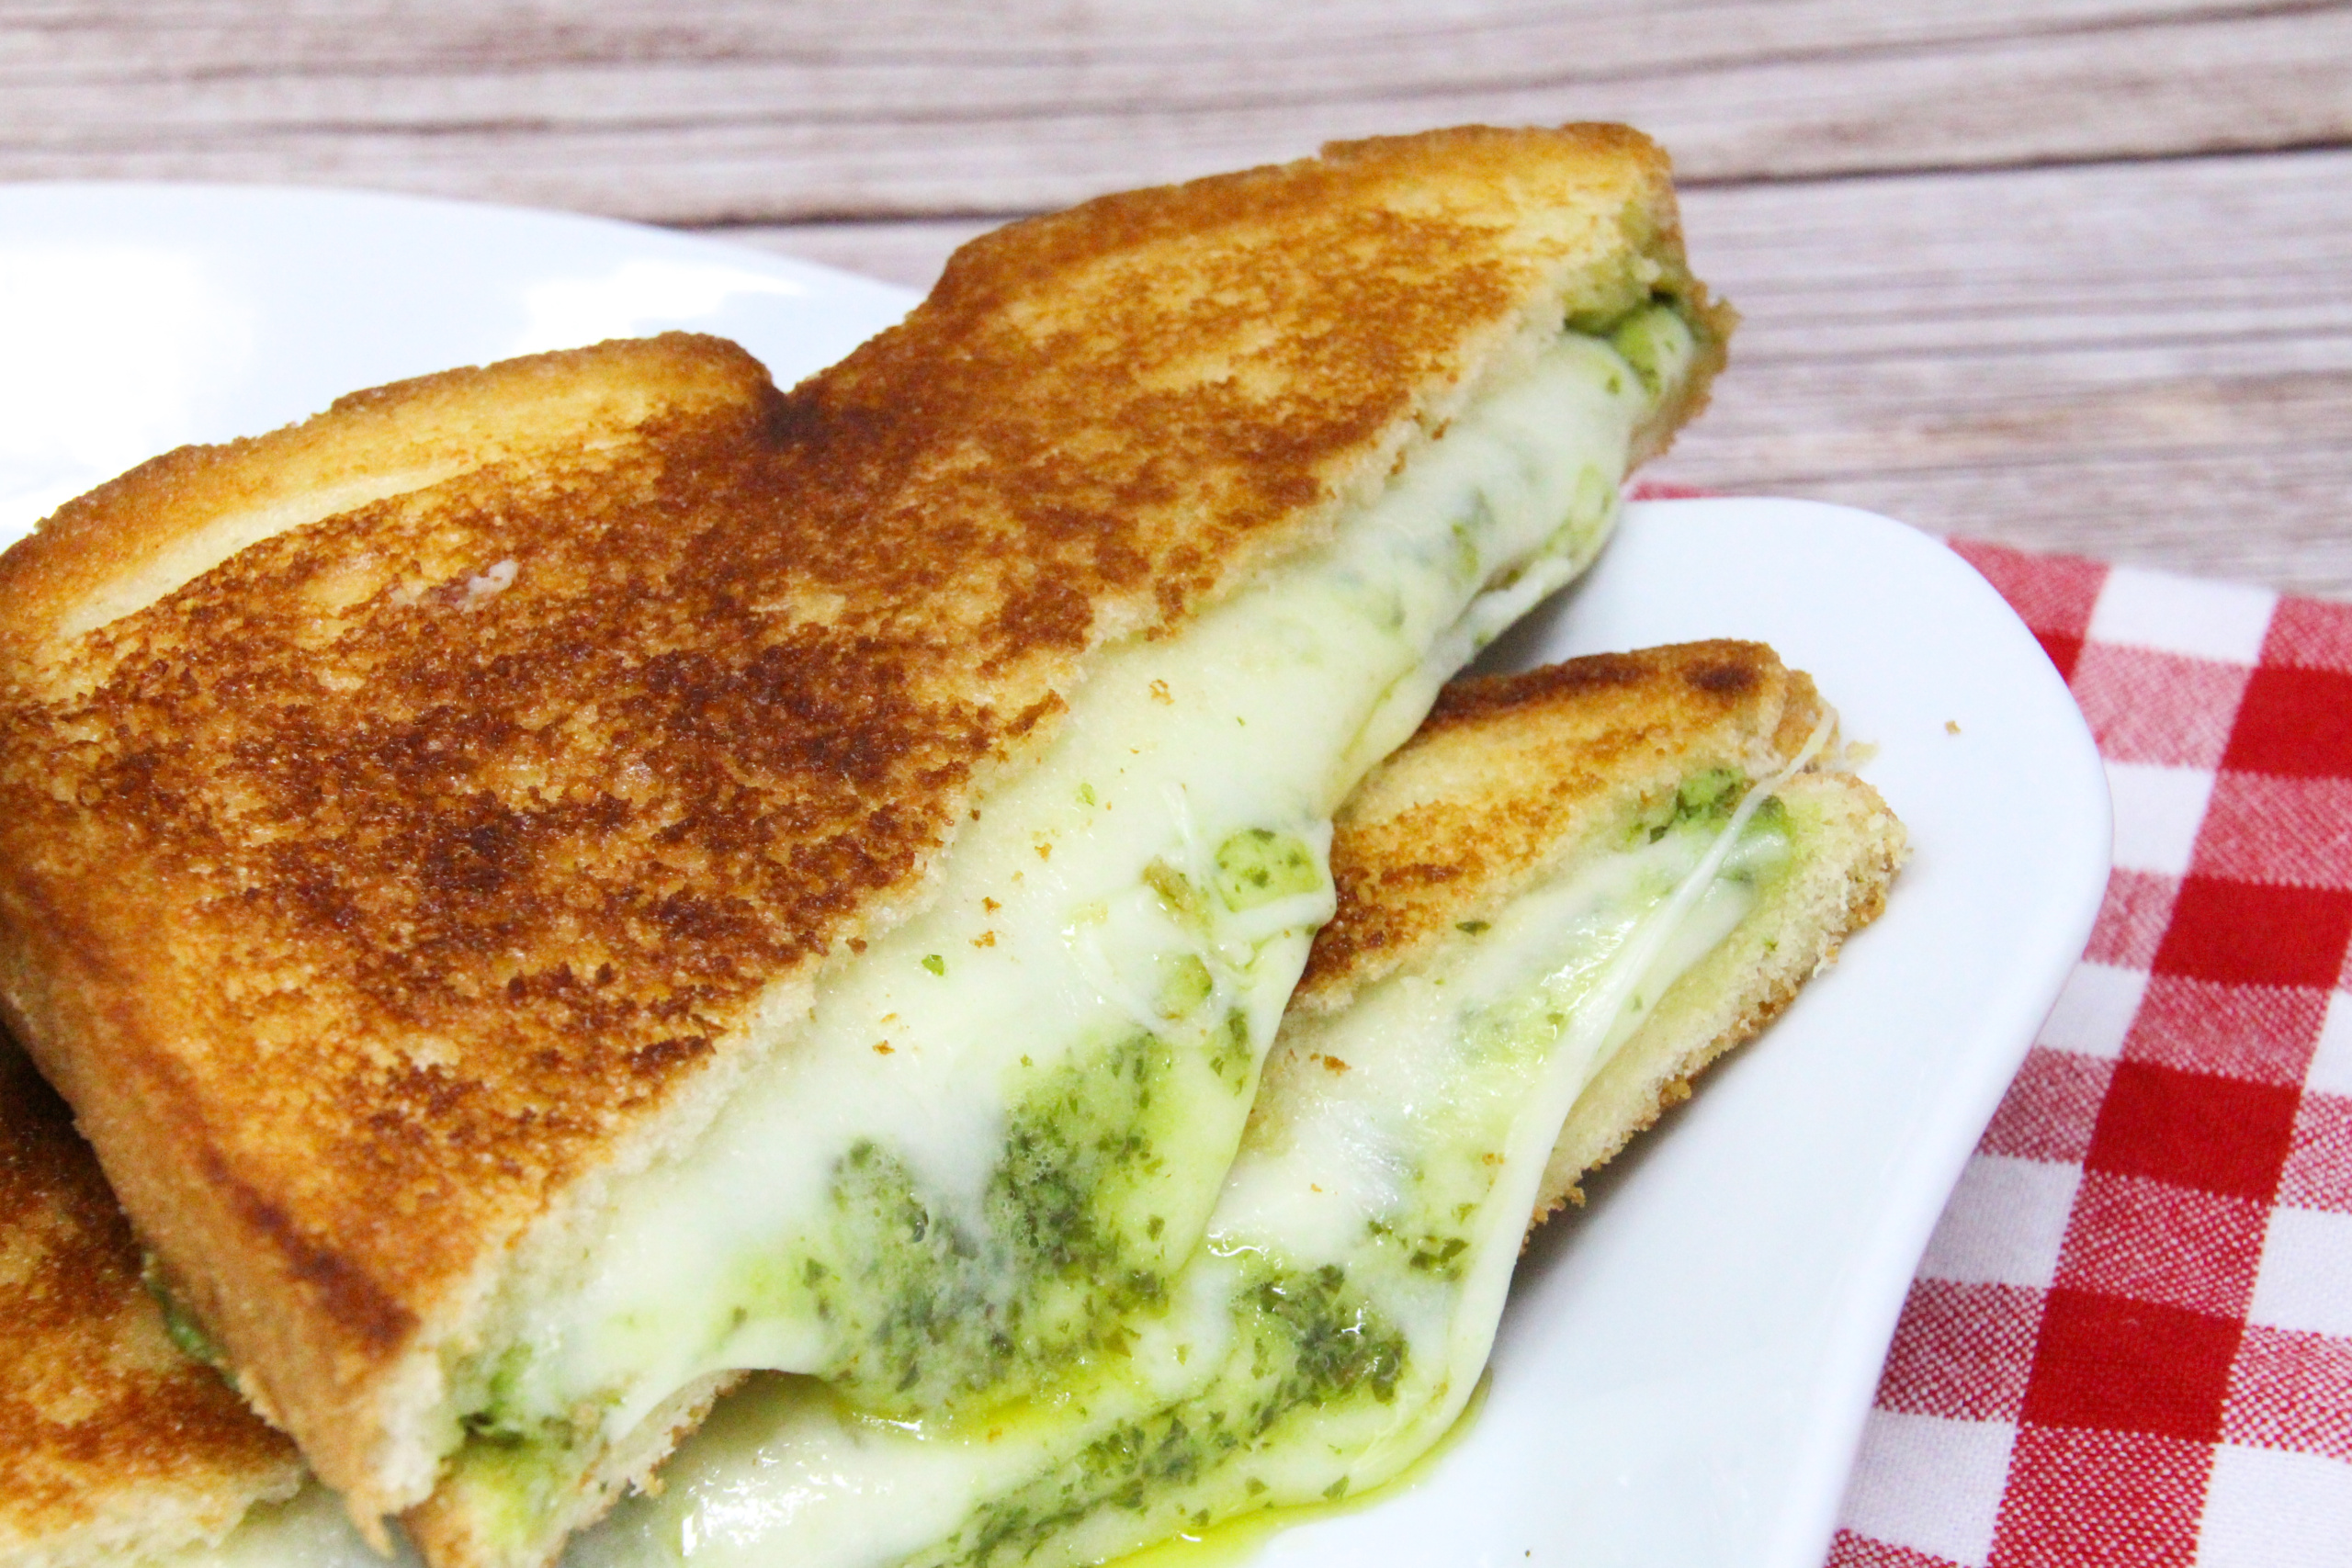 Zesty Pesto Grilled Cheese Sandwich pairs pesto with creamy provolone while the crunchy exterior of the bread provides a nice contrast. Eaten on its own or with Grant’s Tomato Soup, this sandwich is a flavorful delight! Recipe shared with permission granted by Linda Reilly, author of BRIE CAREFUL WHAT YOU WISH FOR. 